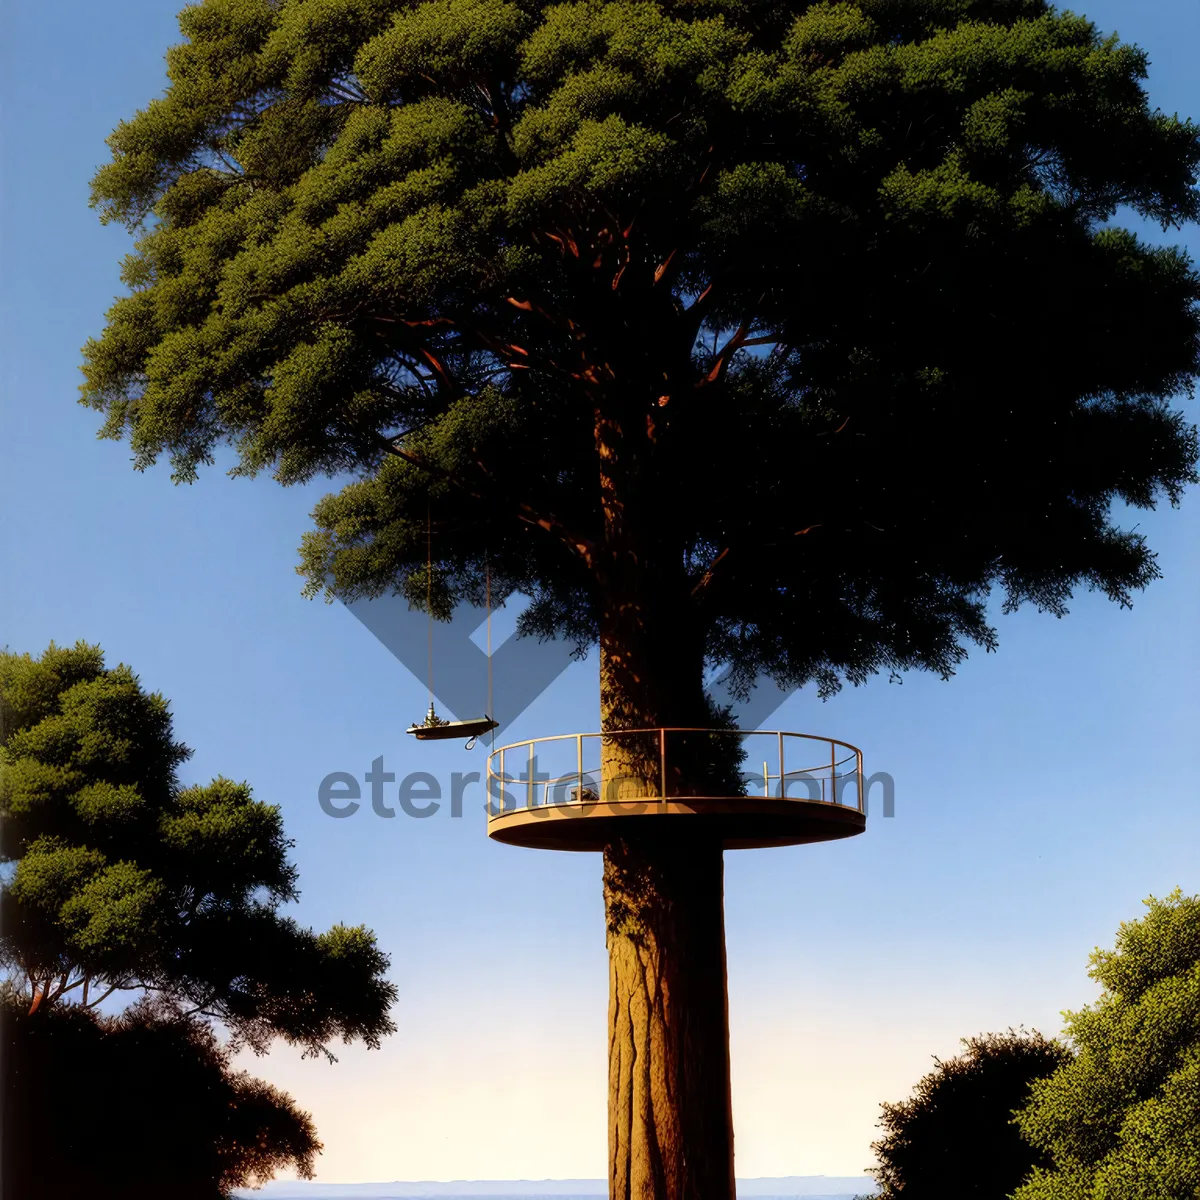 Picture of Serene Summer Landscape with Towering Trees